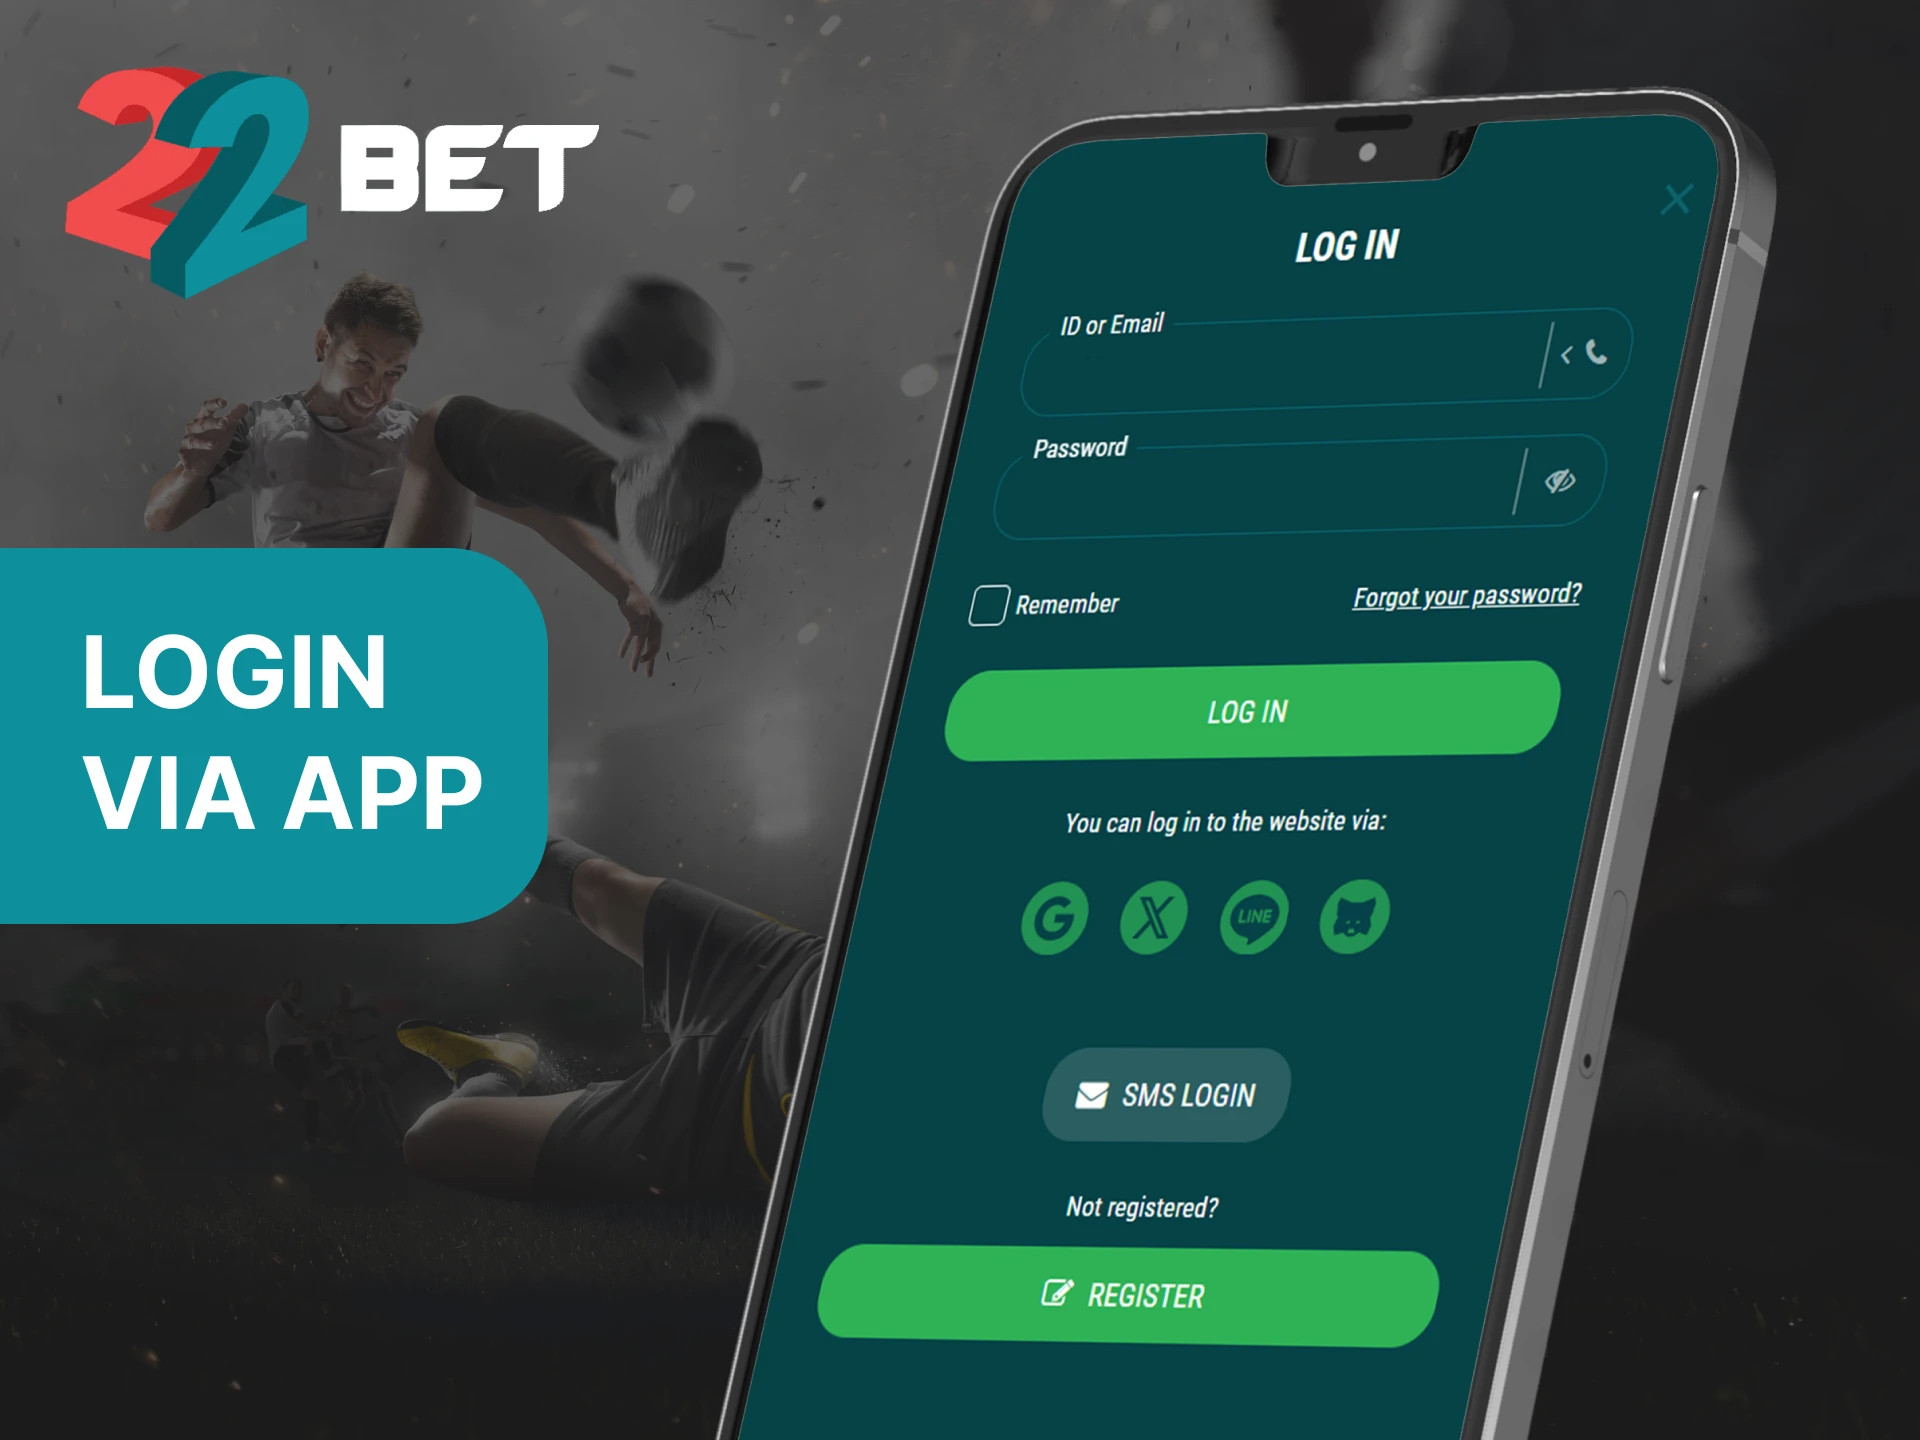 You do not need to create another account for the 22Bet mobile app, log in to your existing account.